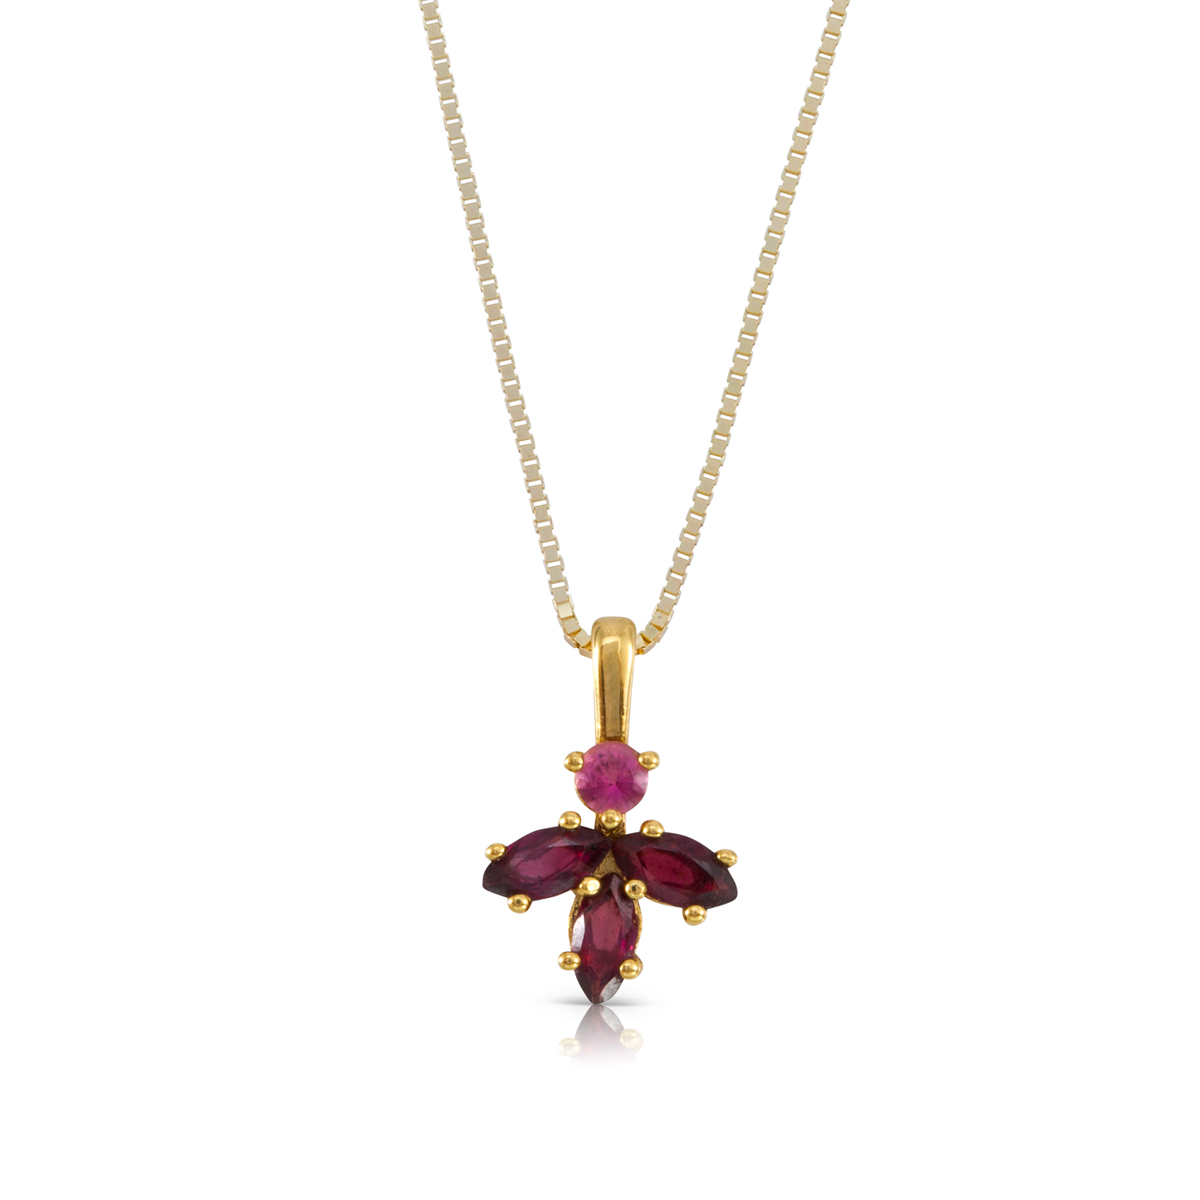 Marquise shaped rhodolite and tourmaline necklace